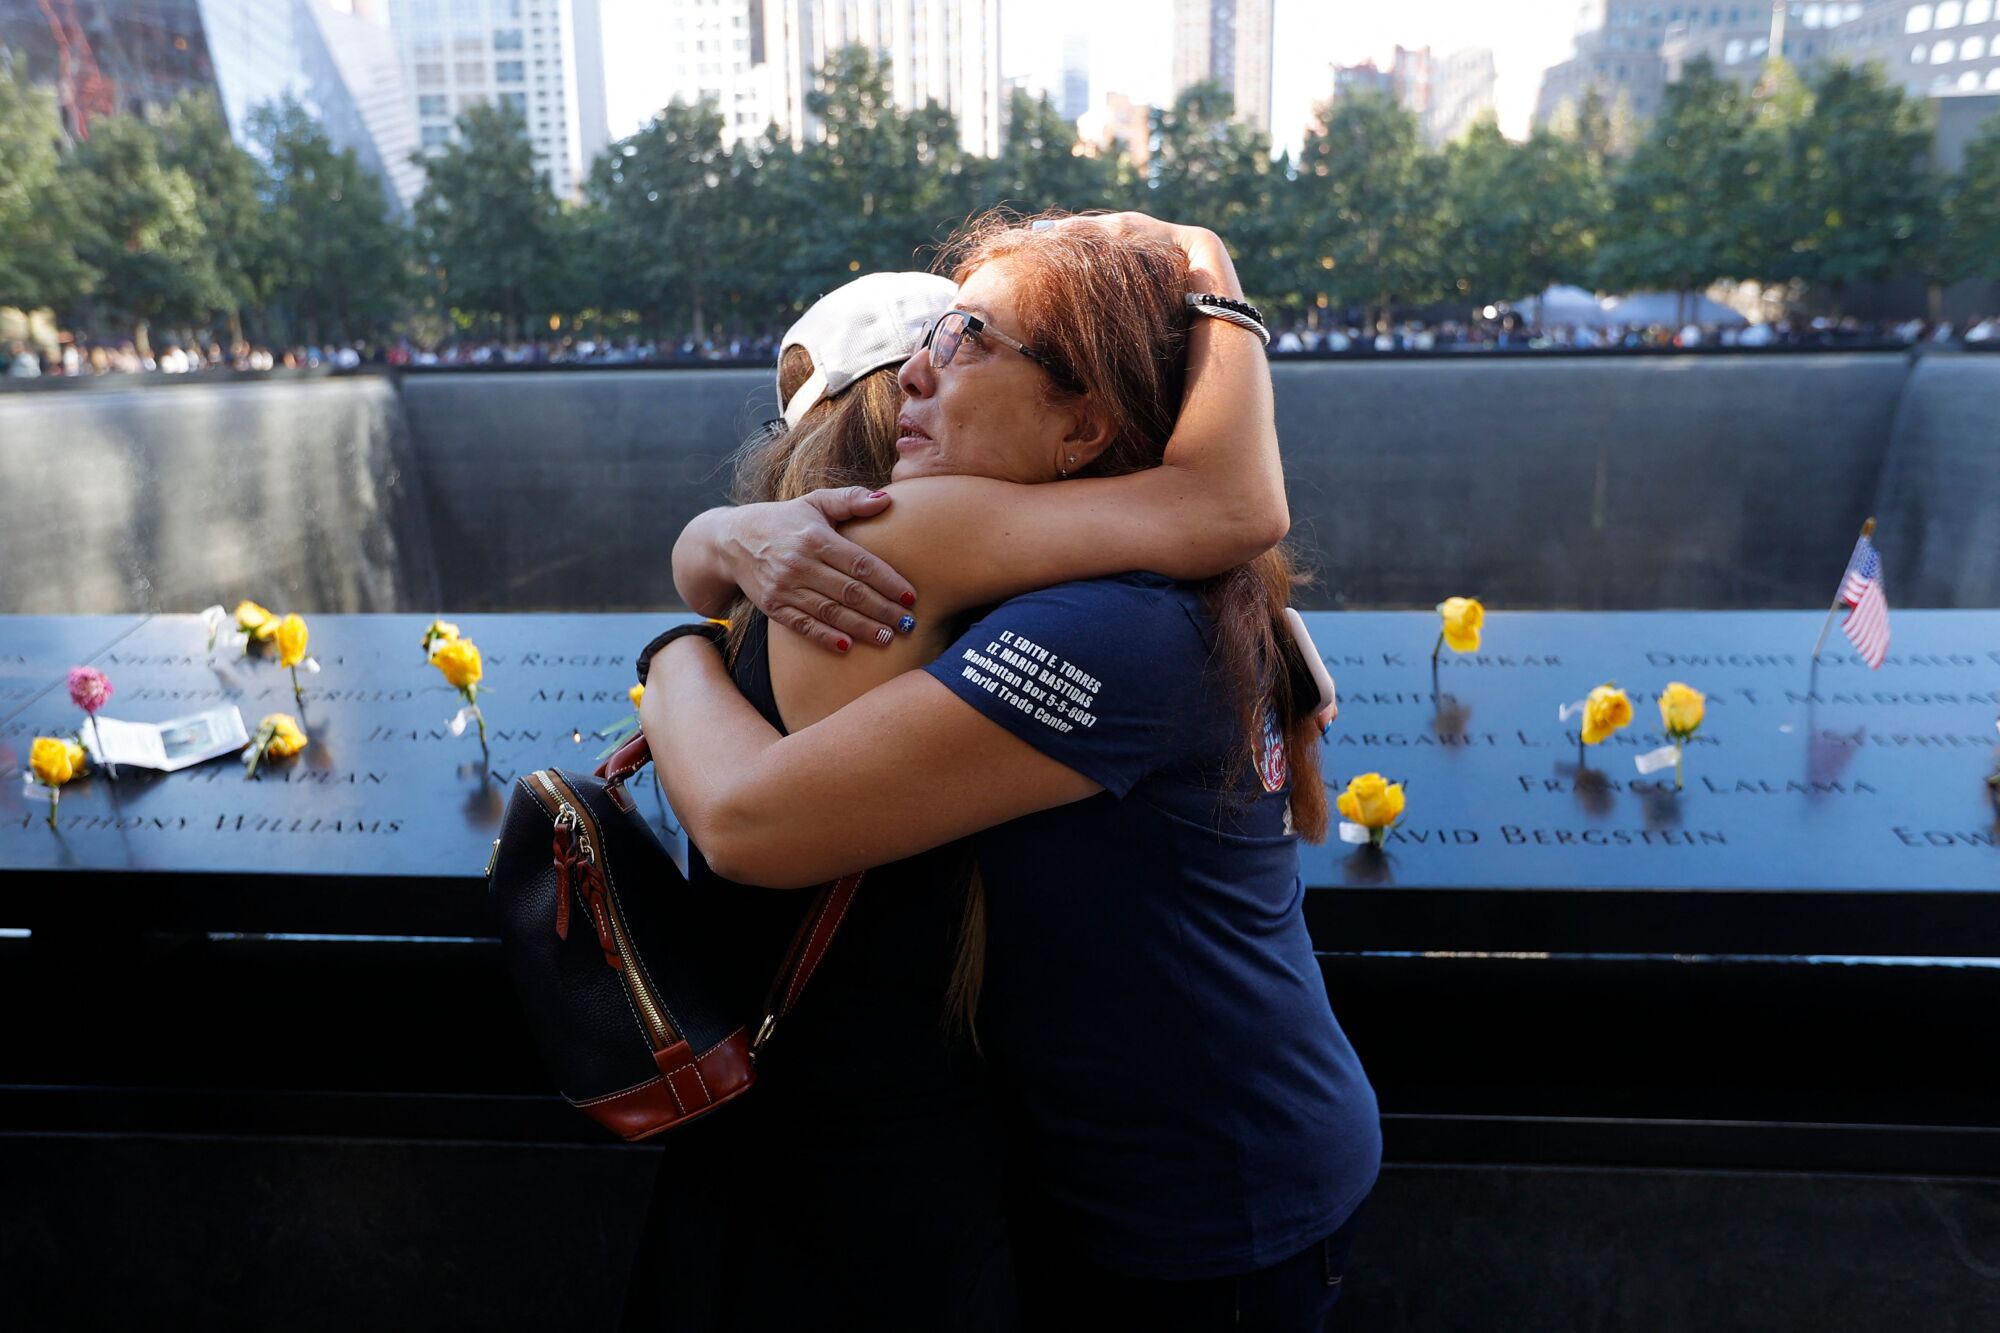 Two women embrace in front of a memorial.